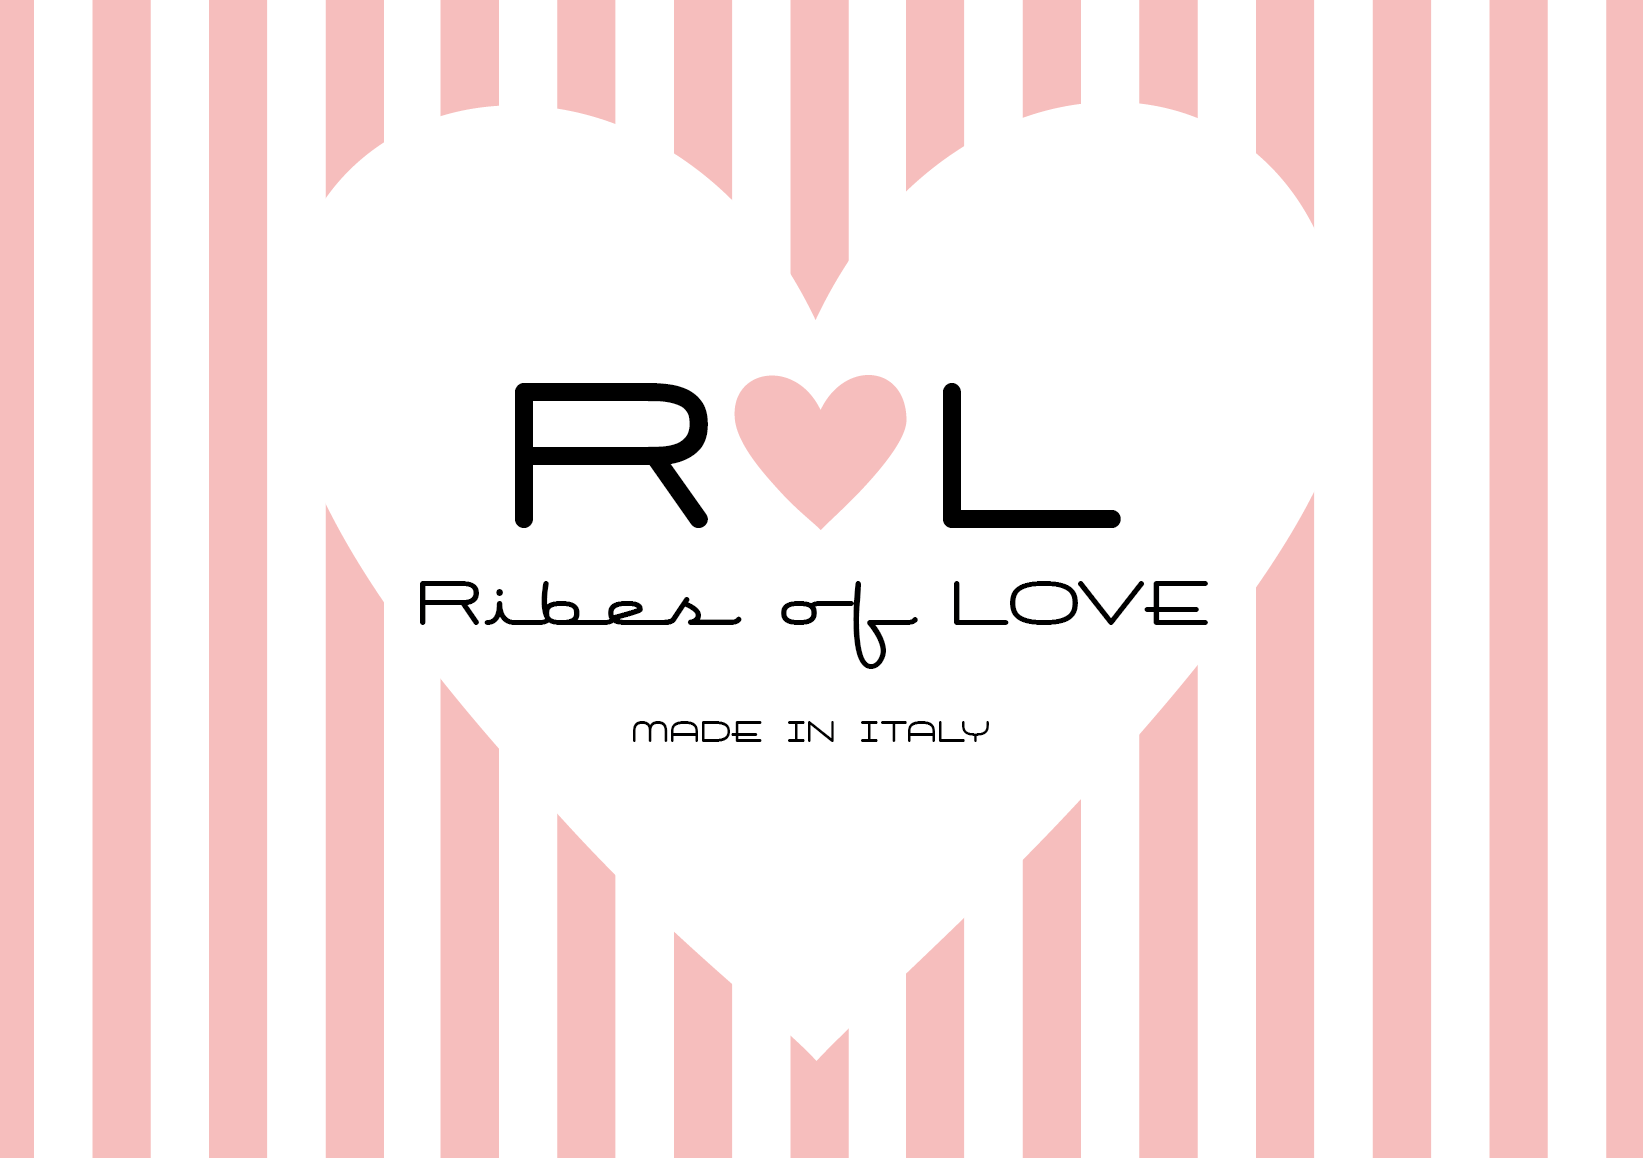 Ribes of LOVE